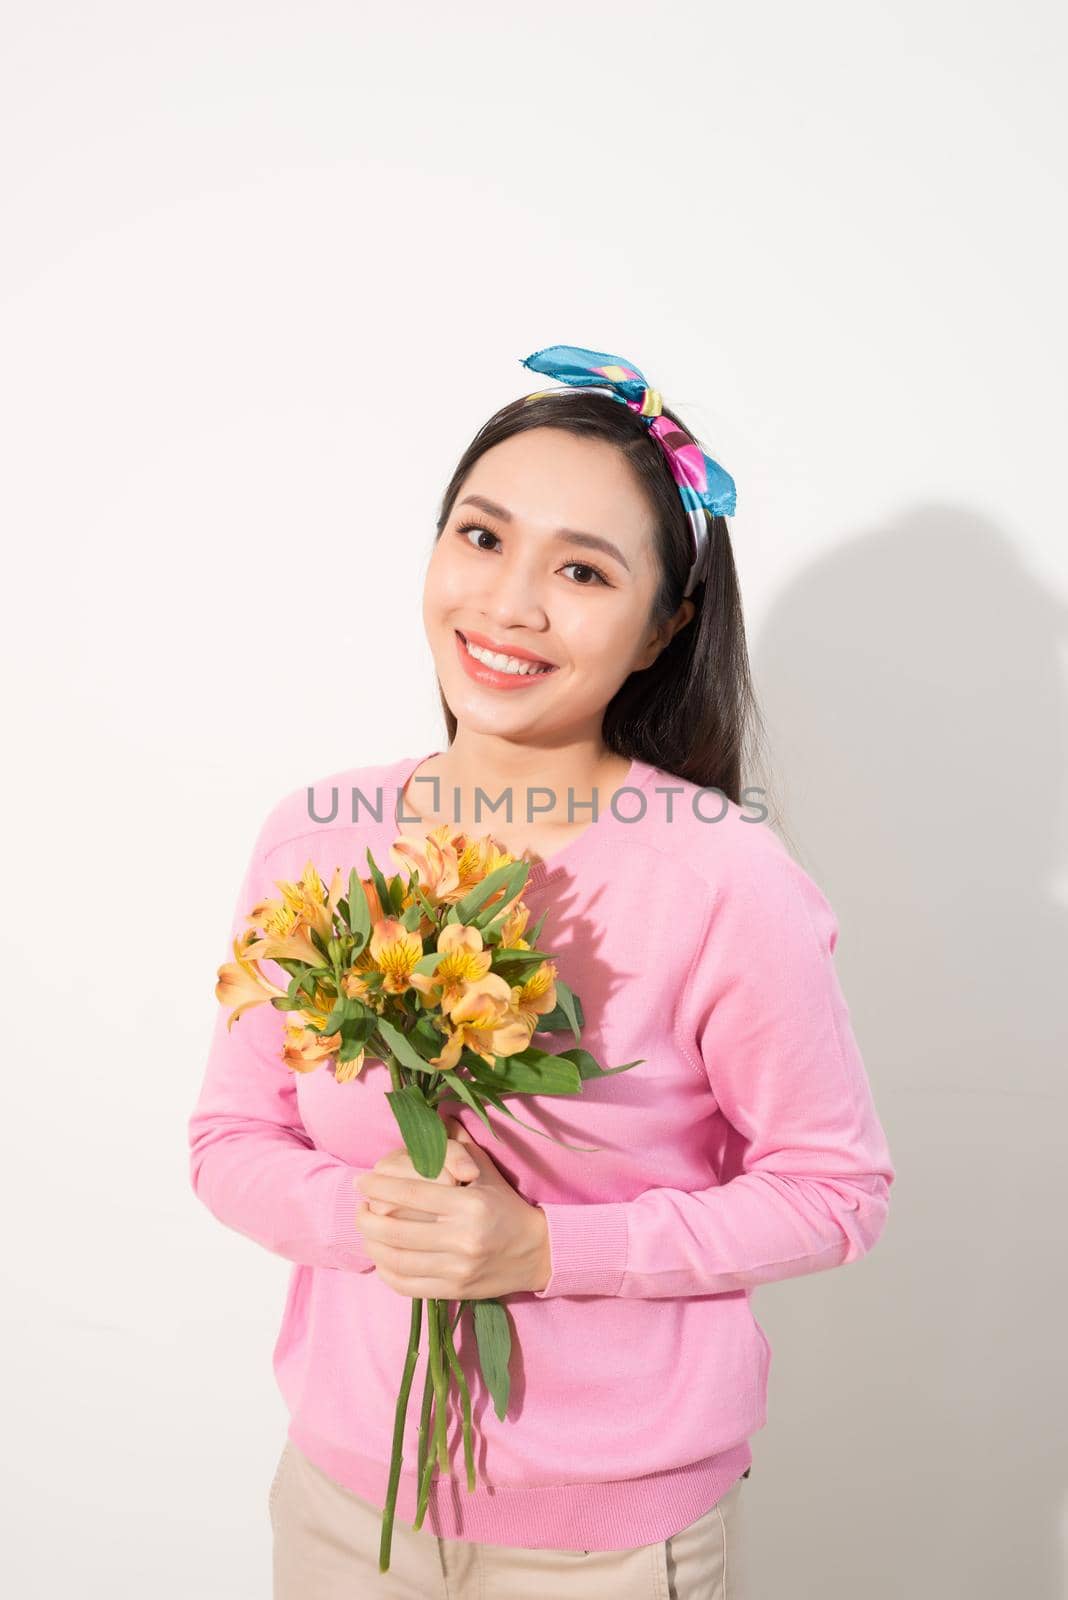 Toothy smiling happy woman holding flower . White background isolated portrait. by makidotvn